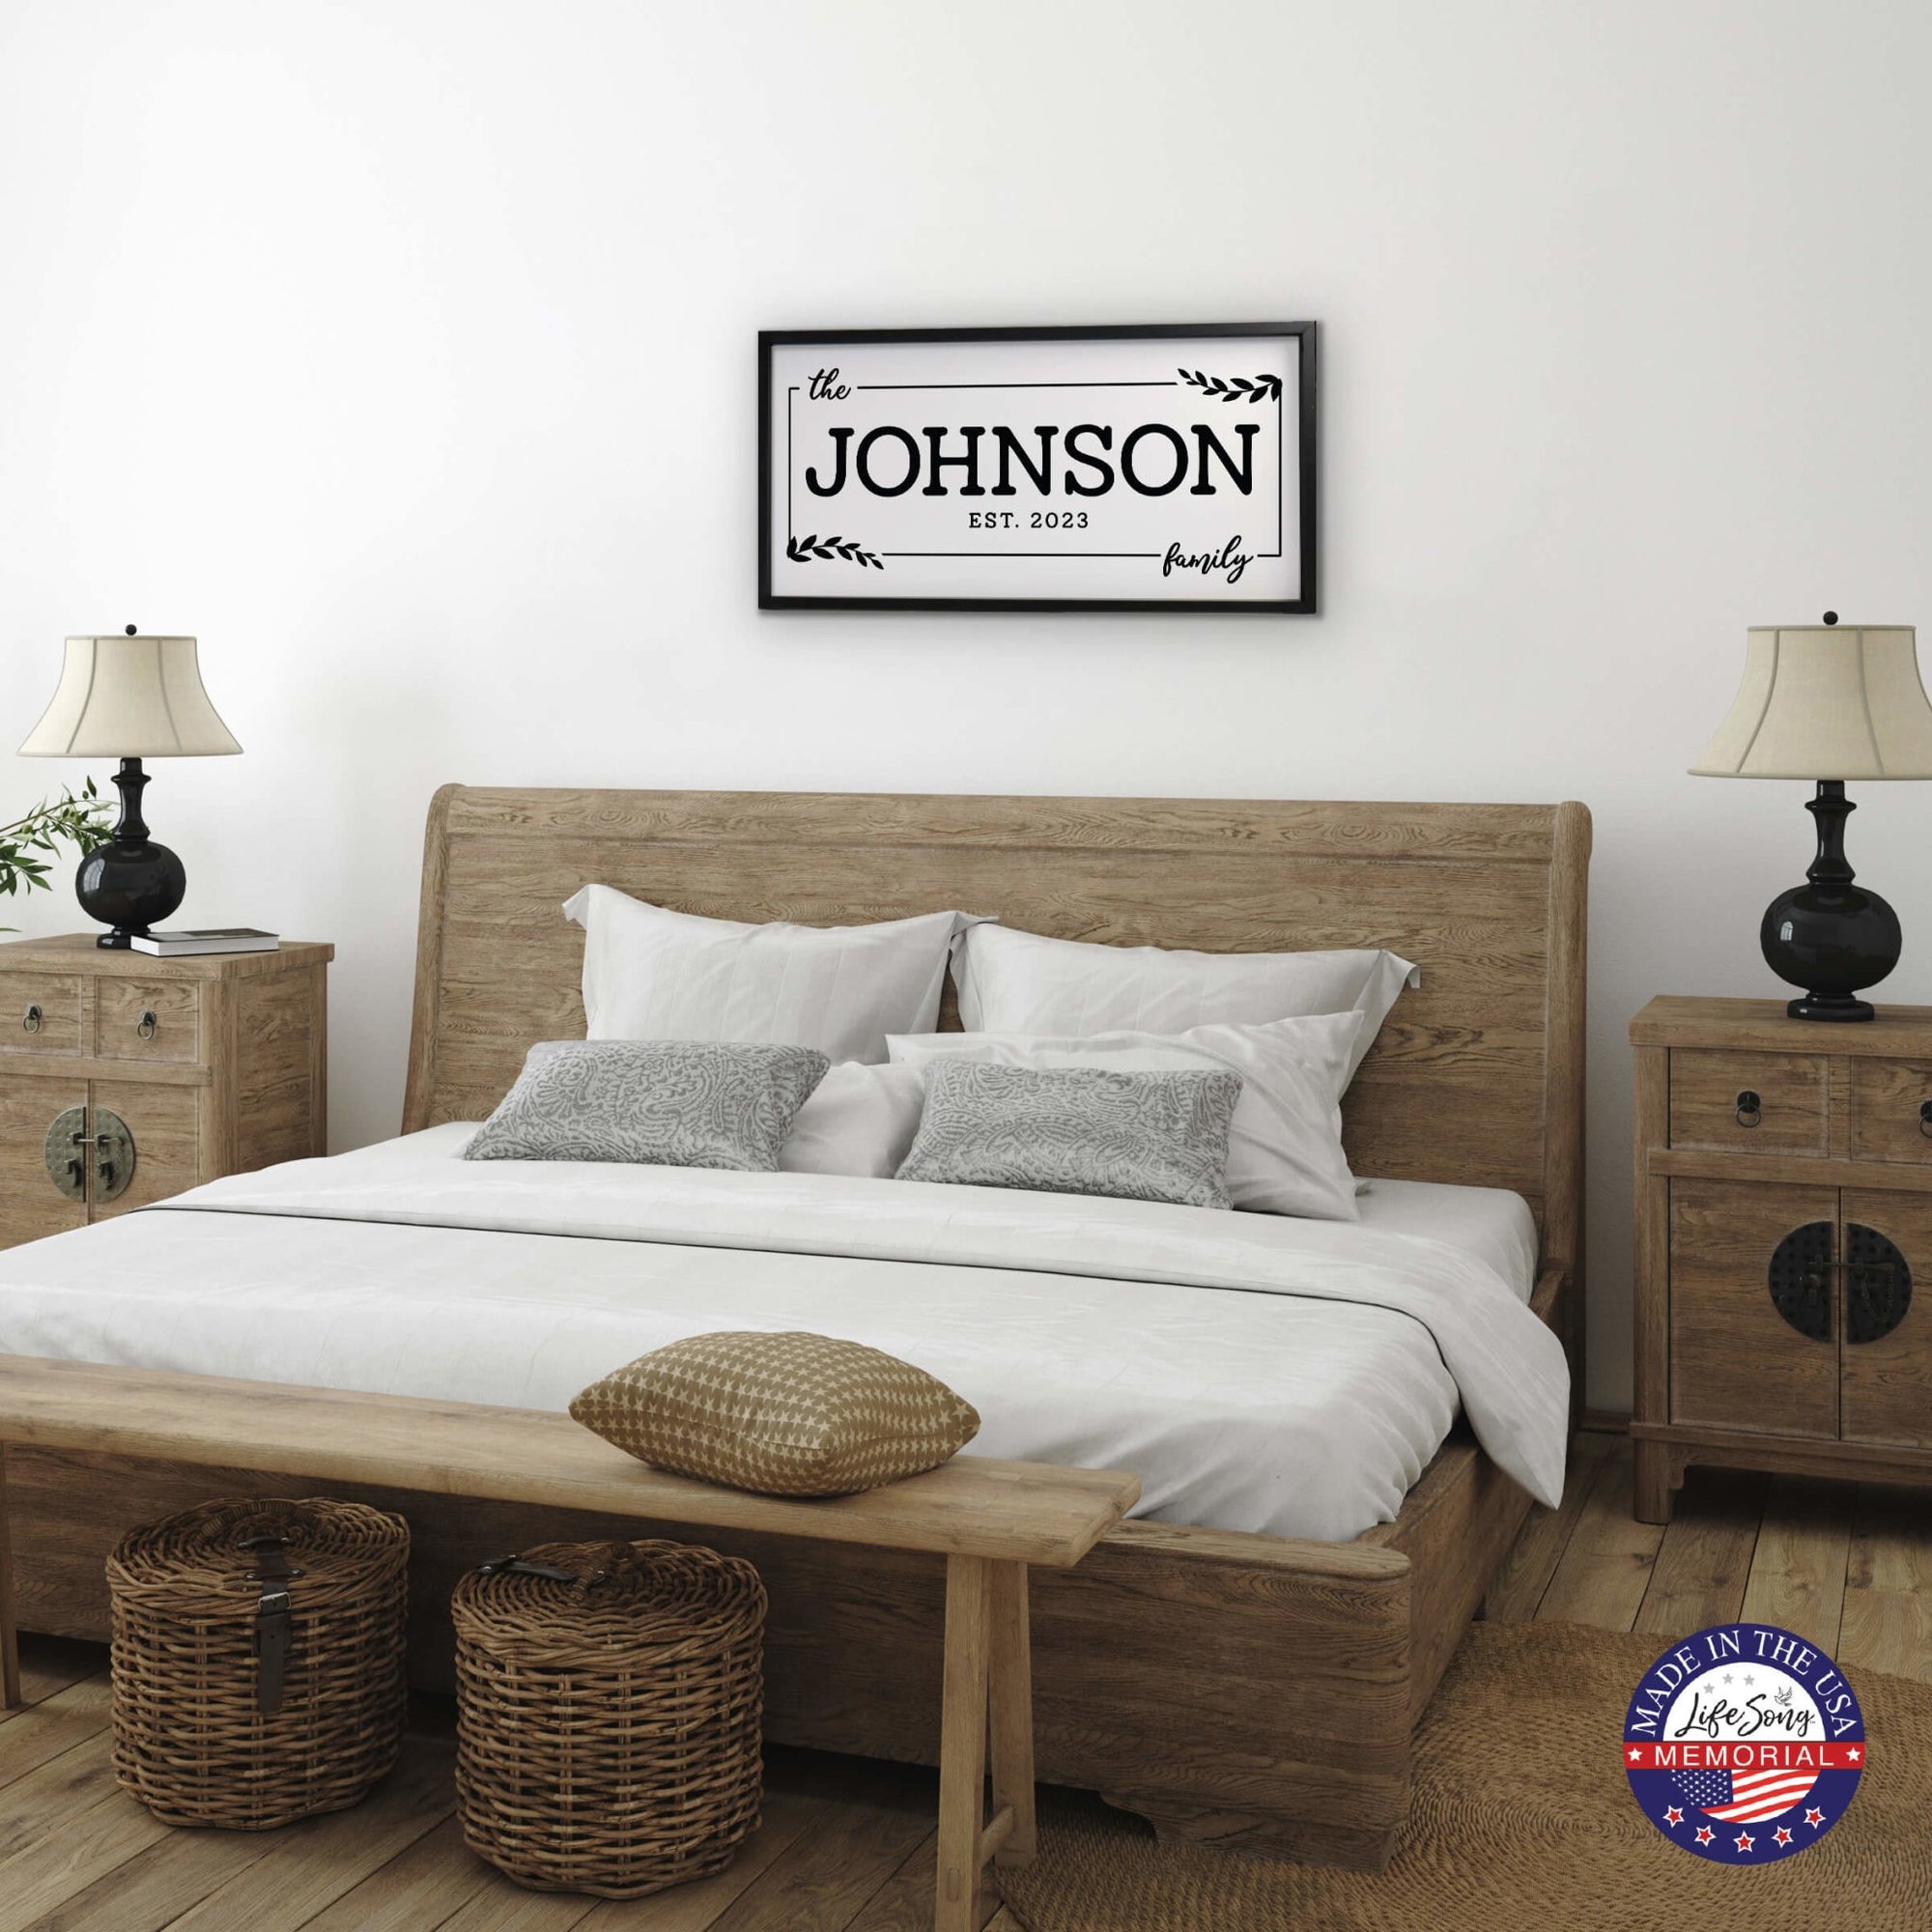 Custom Printed Family Wall Hanging Framed Shadow Box For Home Décor Ideas - Johnson Family - LifeSong Milestones